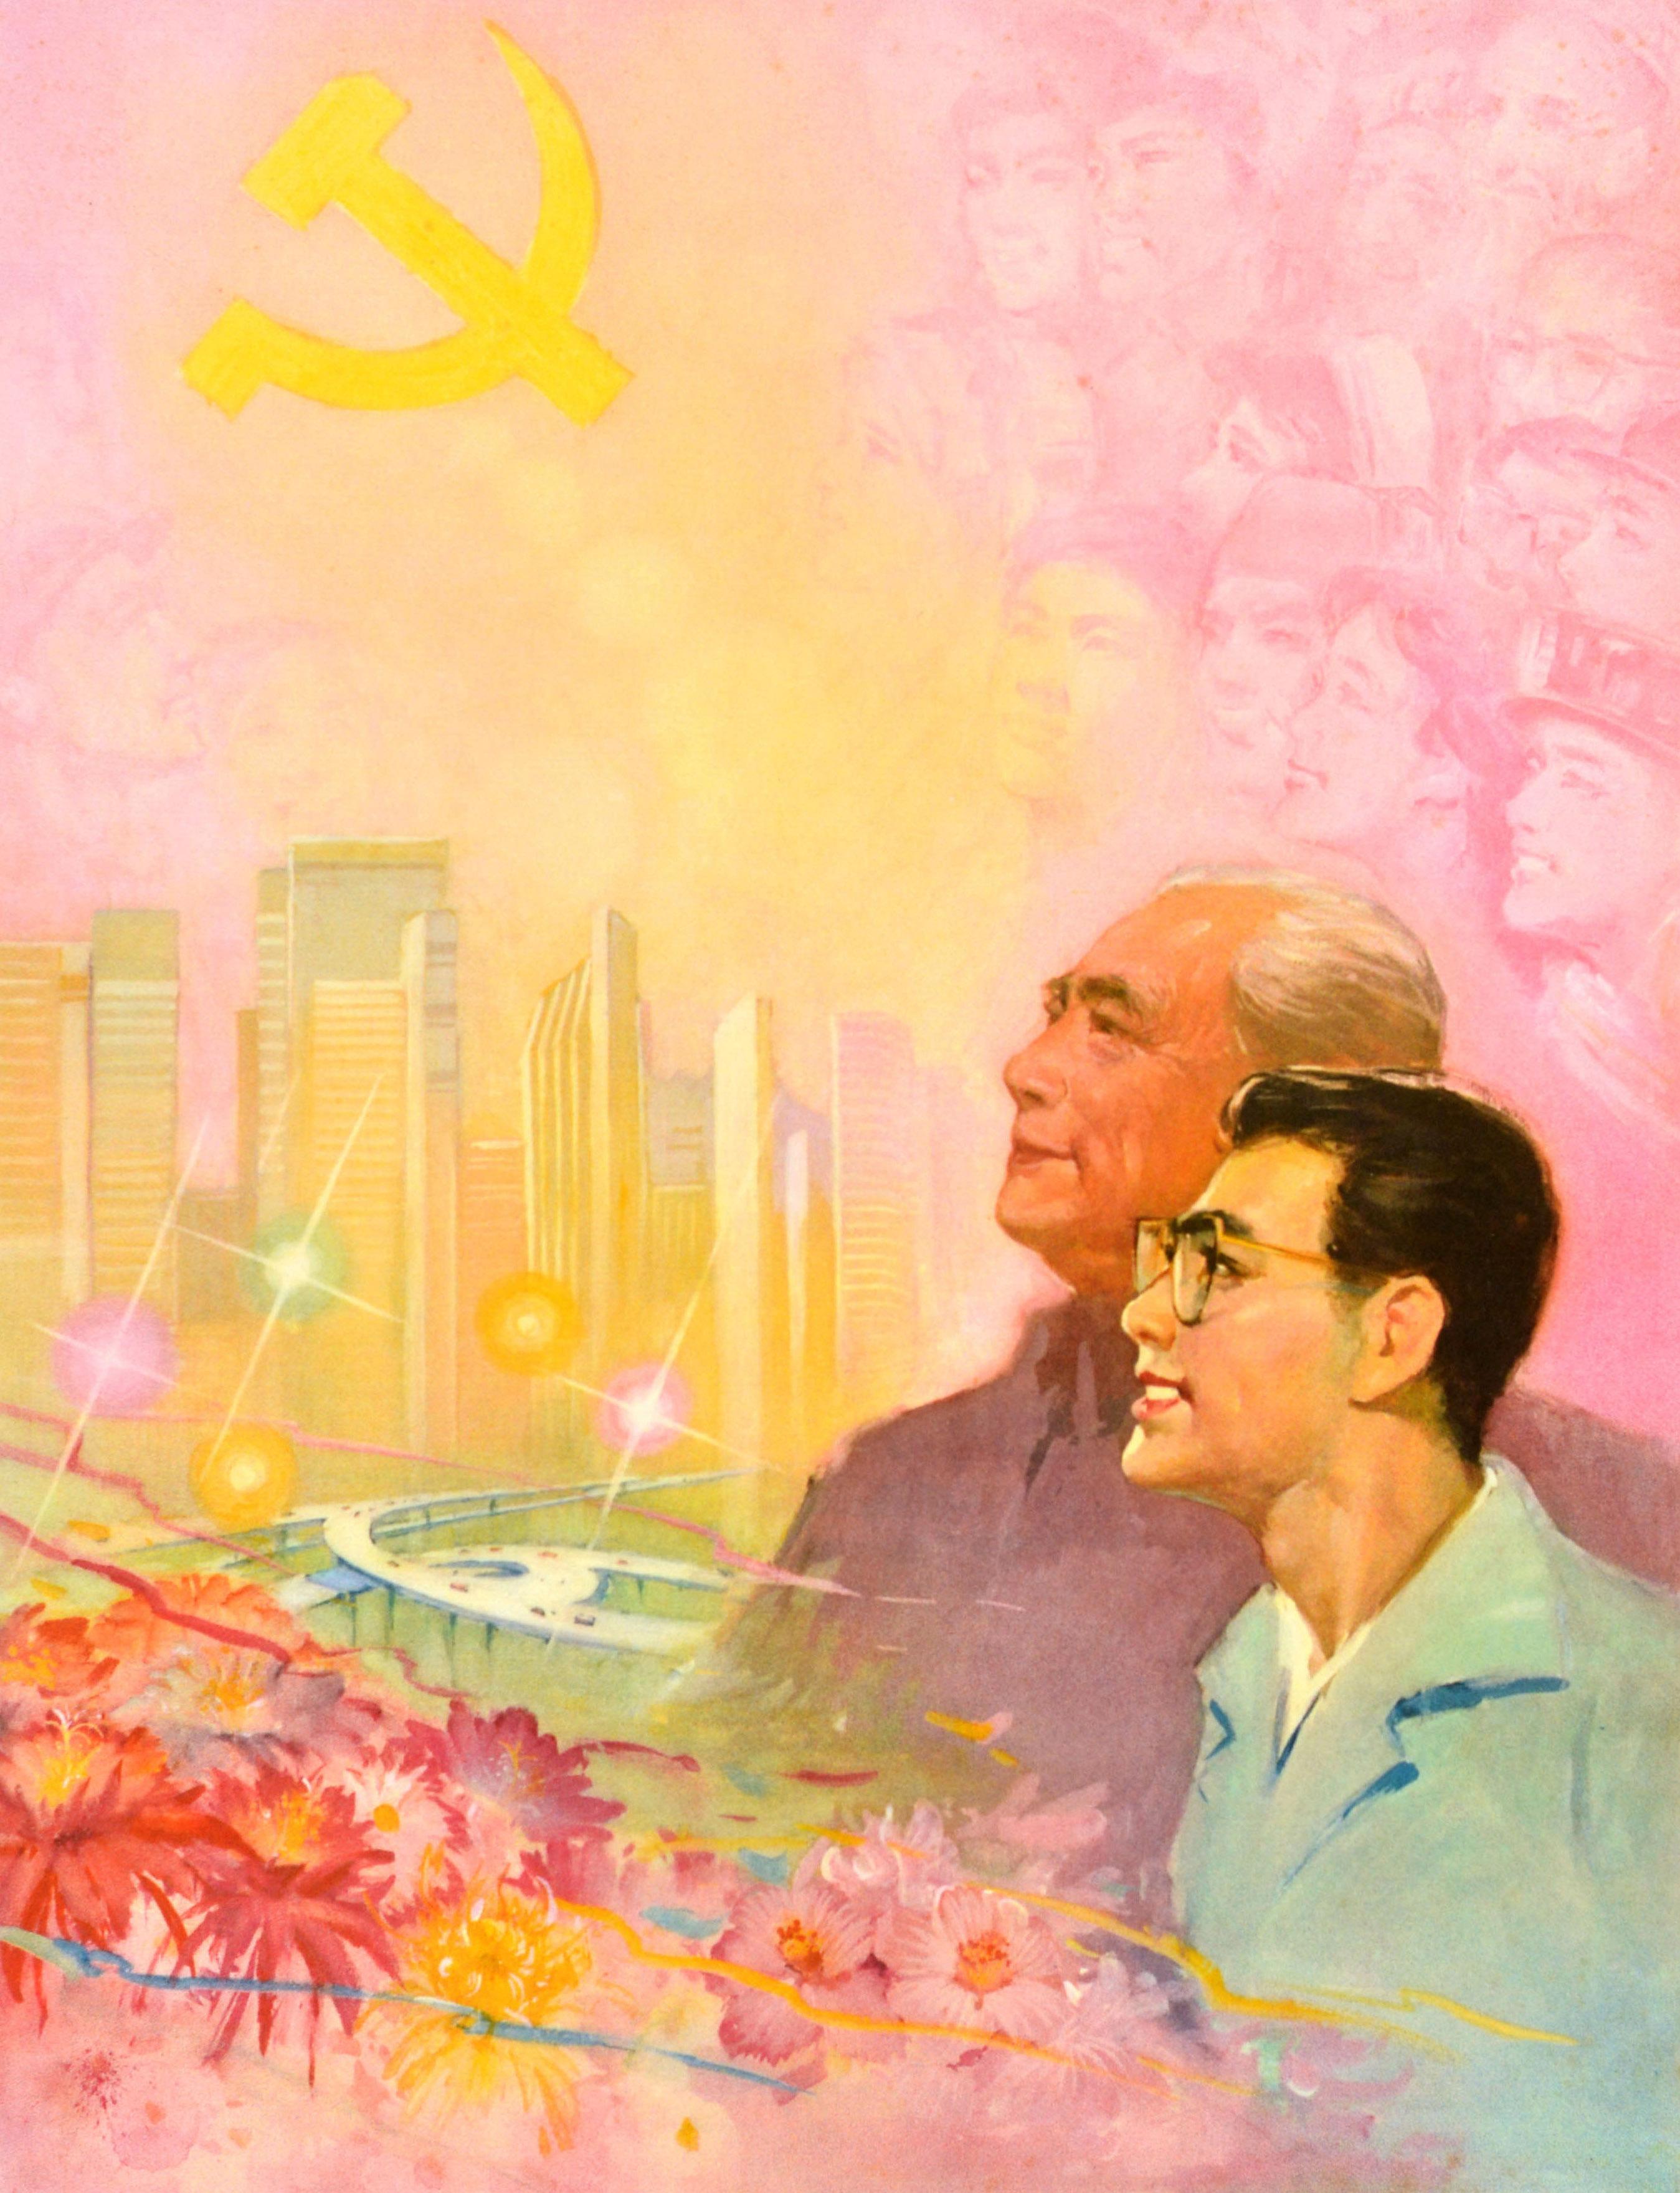 Original vintage Chinese Communist Party propaganda poster - Follow the Communist Party and Revitalise China / 跟着共产党 振兴中华 - featuring an illustration of a smiling elderly gentlemen and young man looking up towards a bright future represented by a